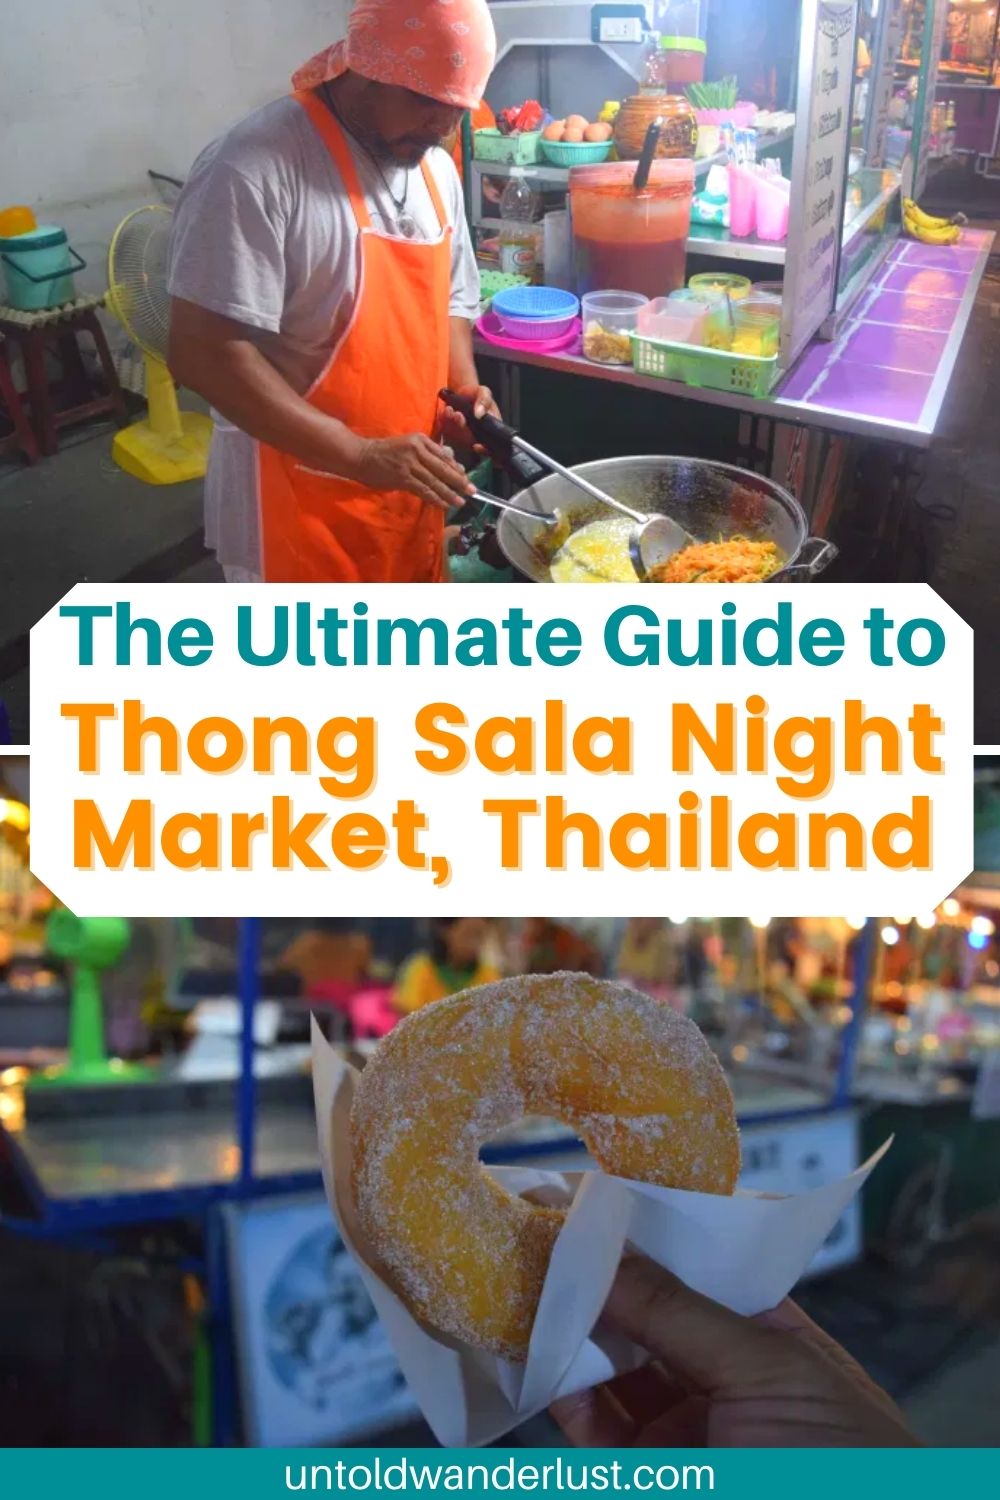 The Ultimate Guide to Thong Sala Night Market, Thailand